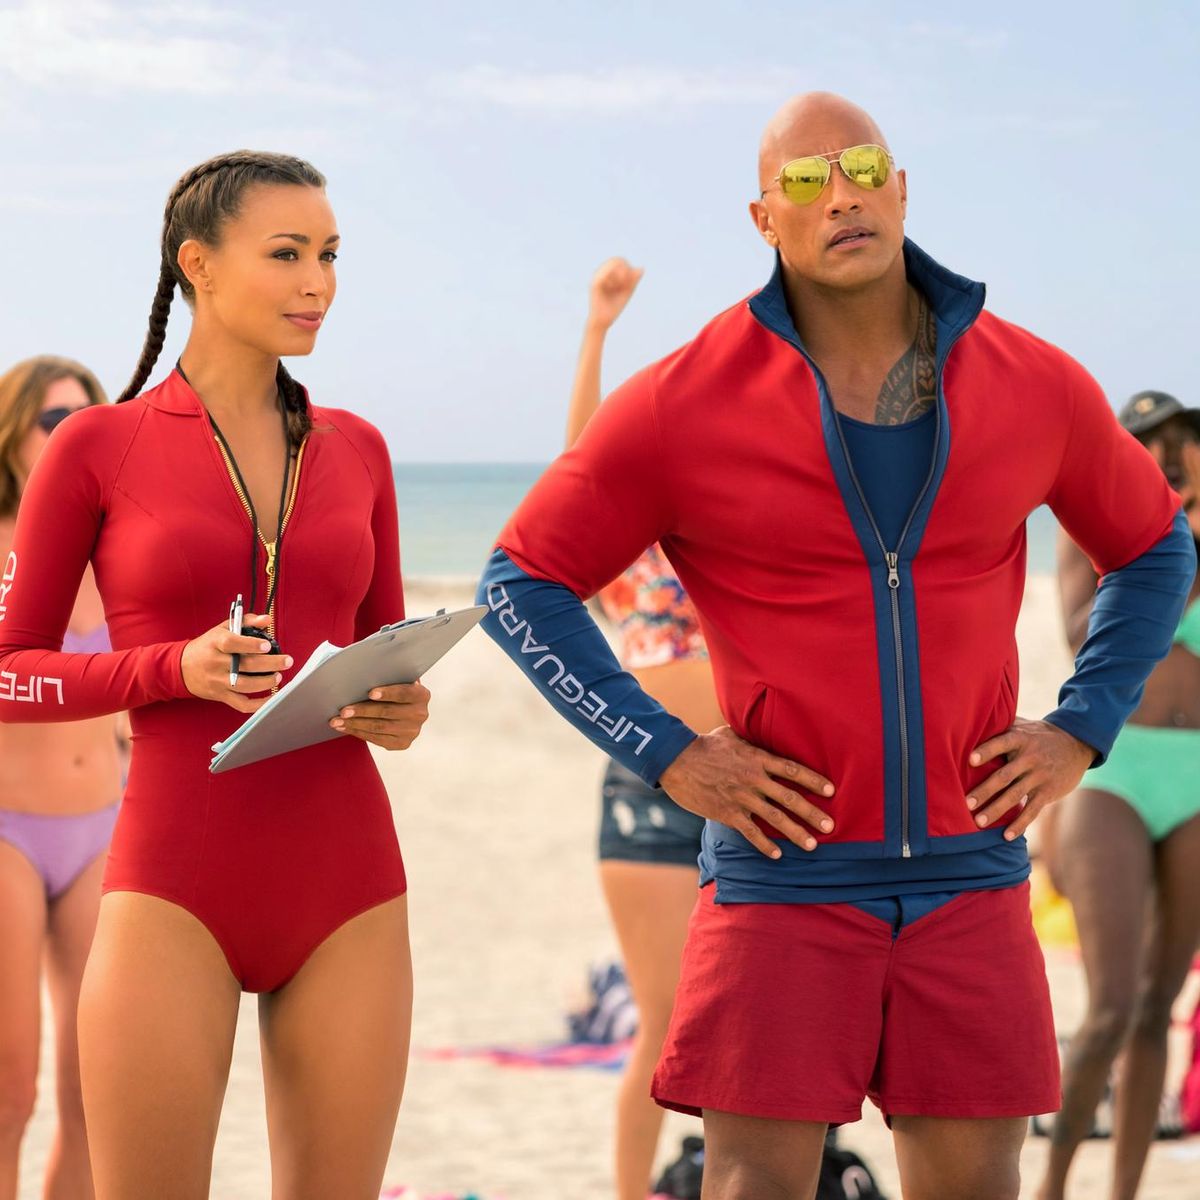 Baywatch Costume Designer Used Butt Glue to Keep Costumes in Place